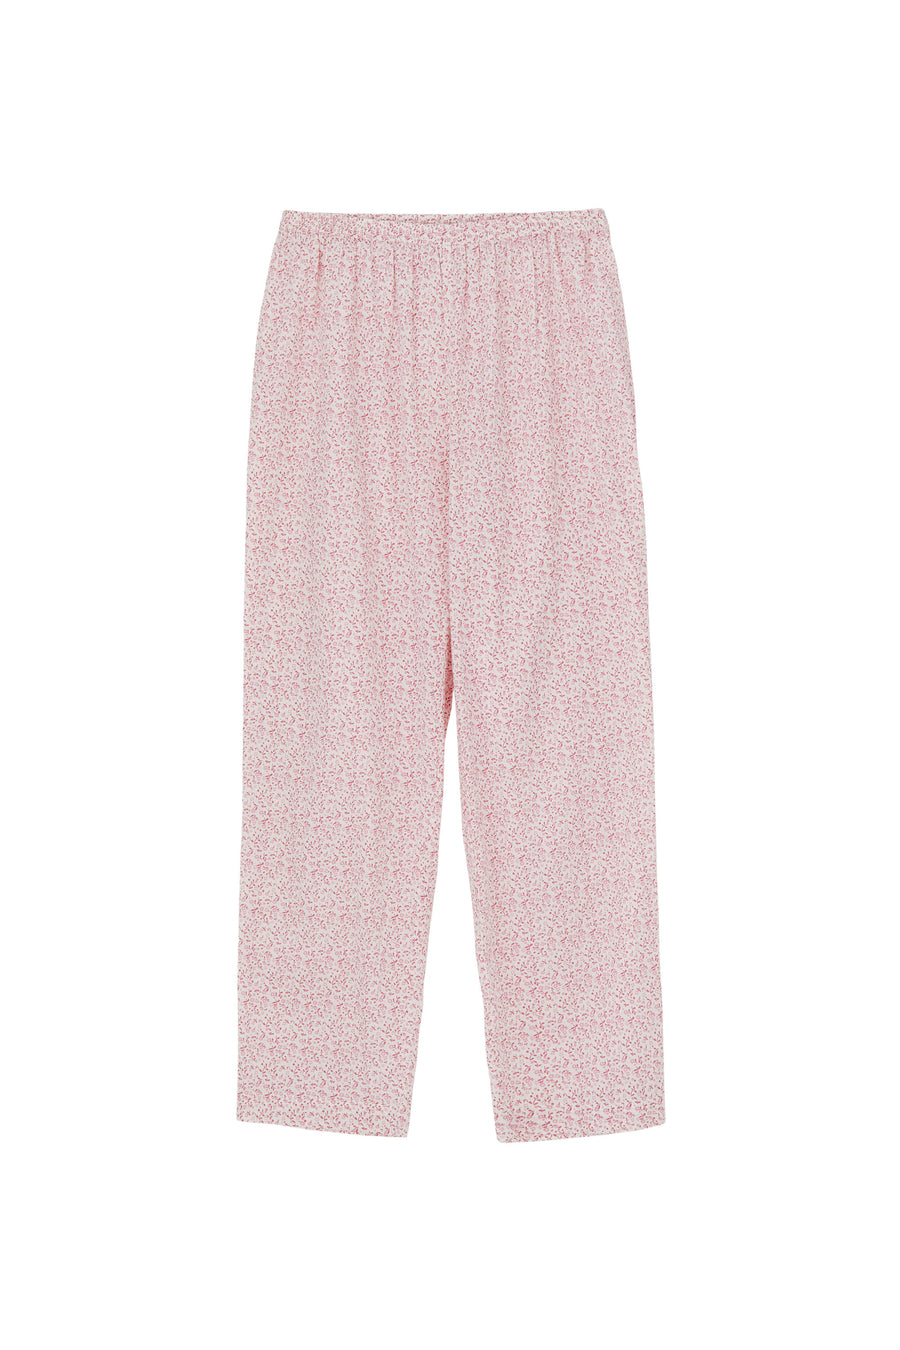 Provence Pants - Garden print/Soft pink/Off white